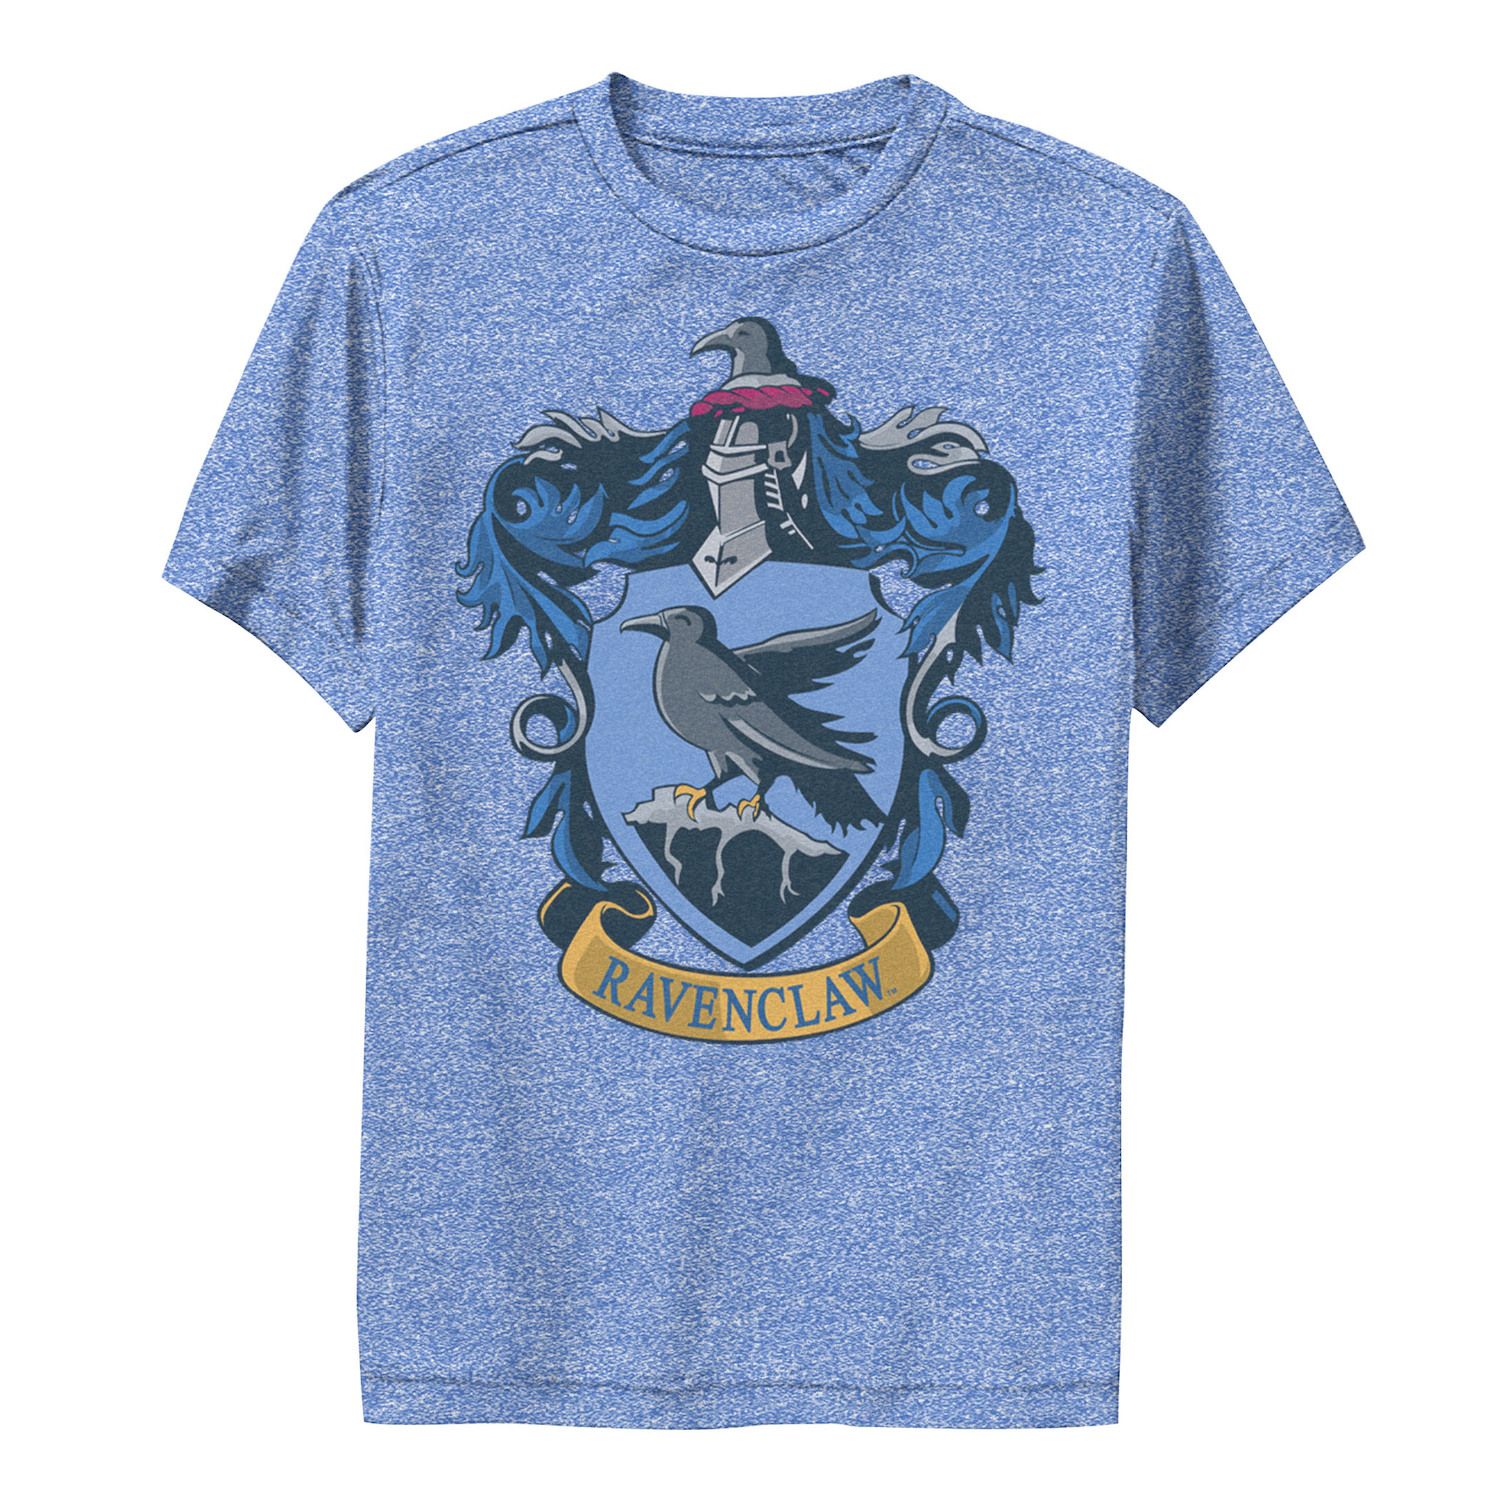 Image for Harry Potter Boys 8-20 Ravenclaw House Crest Performance Graphic Tee at Kohl's.